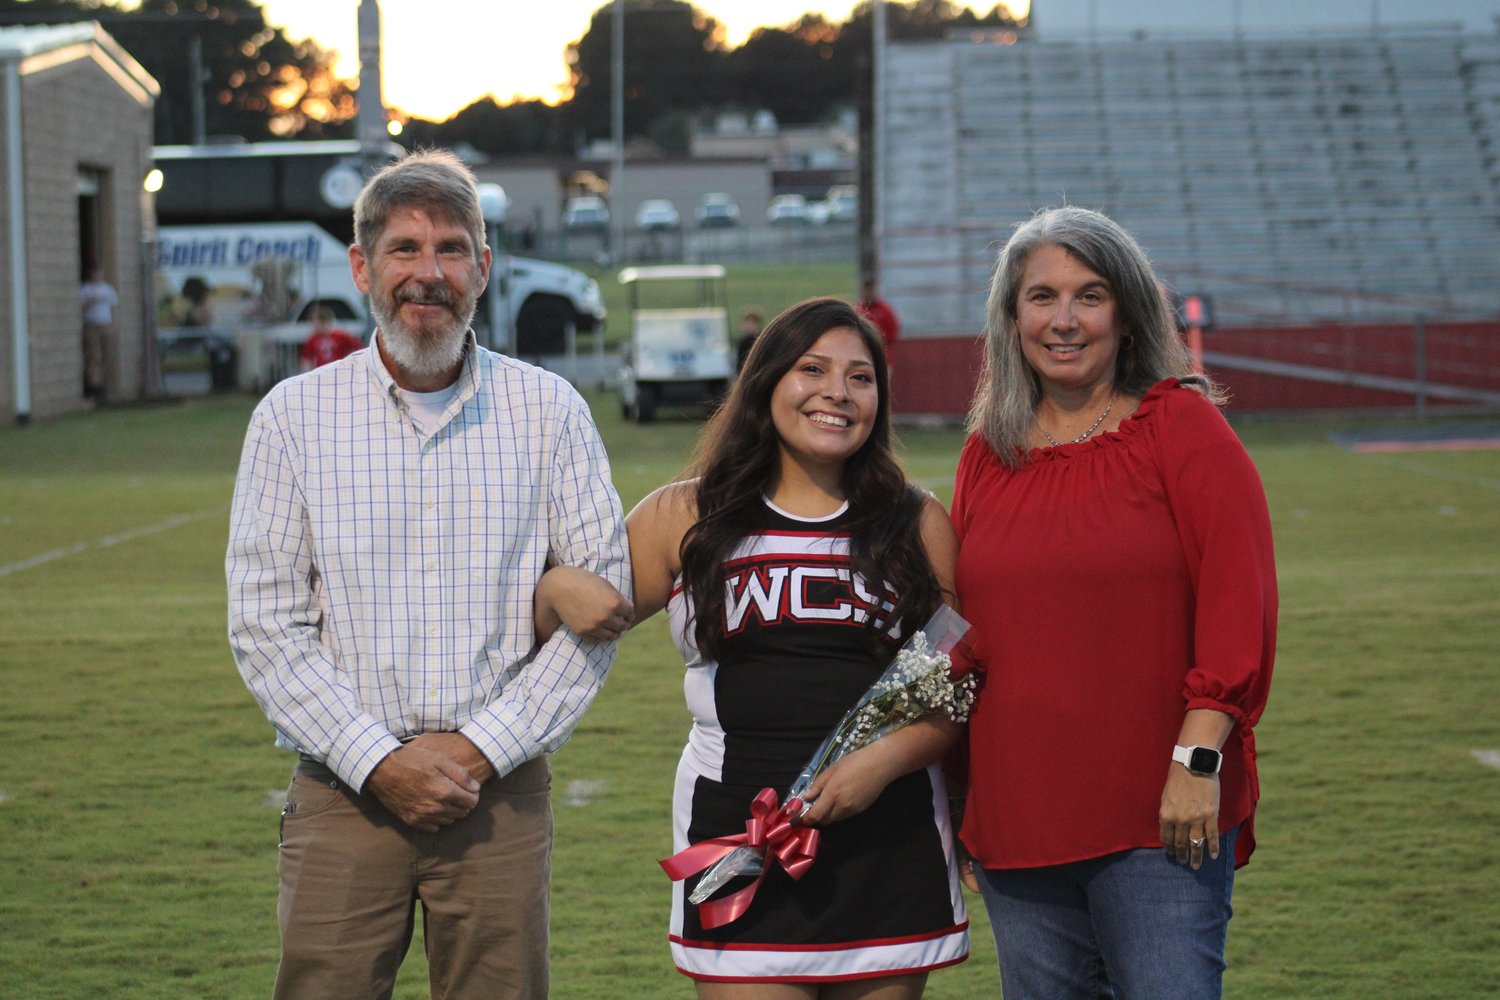 Diana with houseparents Mike and Suzanne on Senior Night 